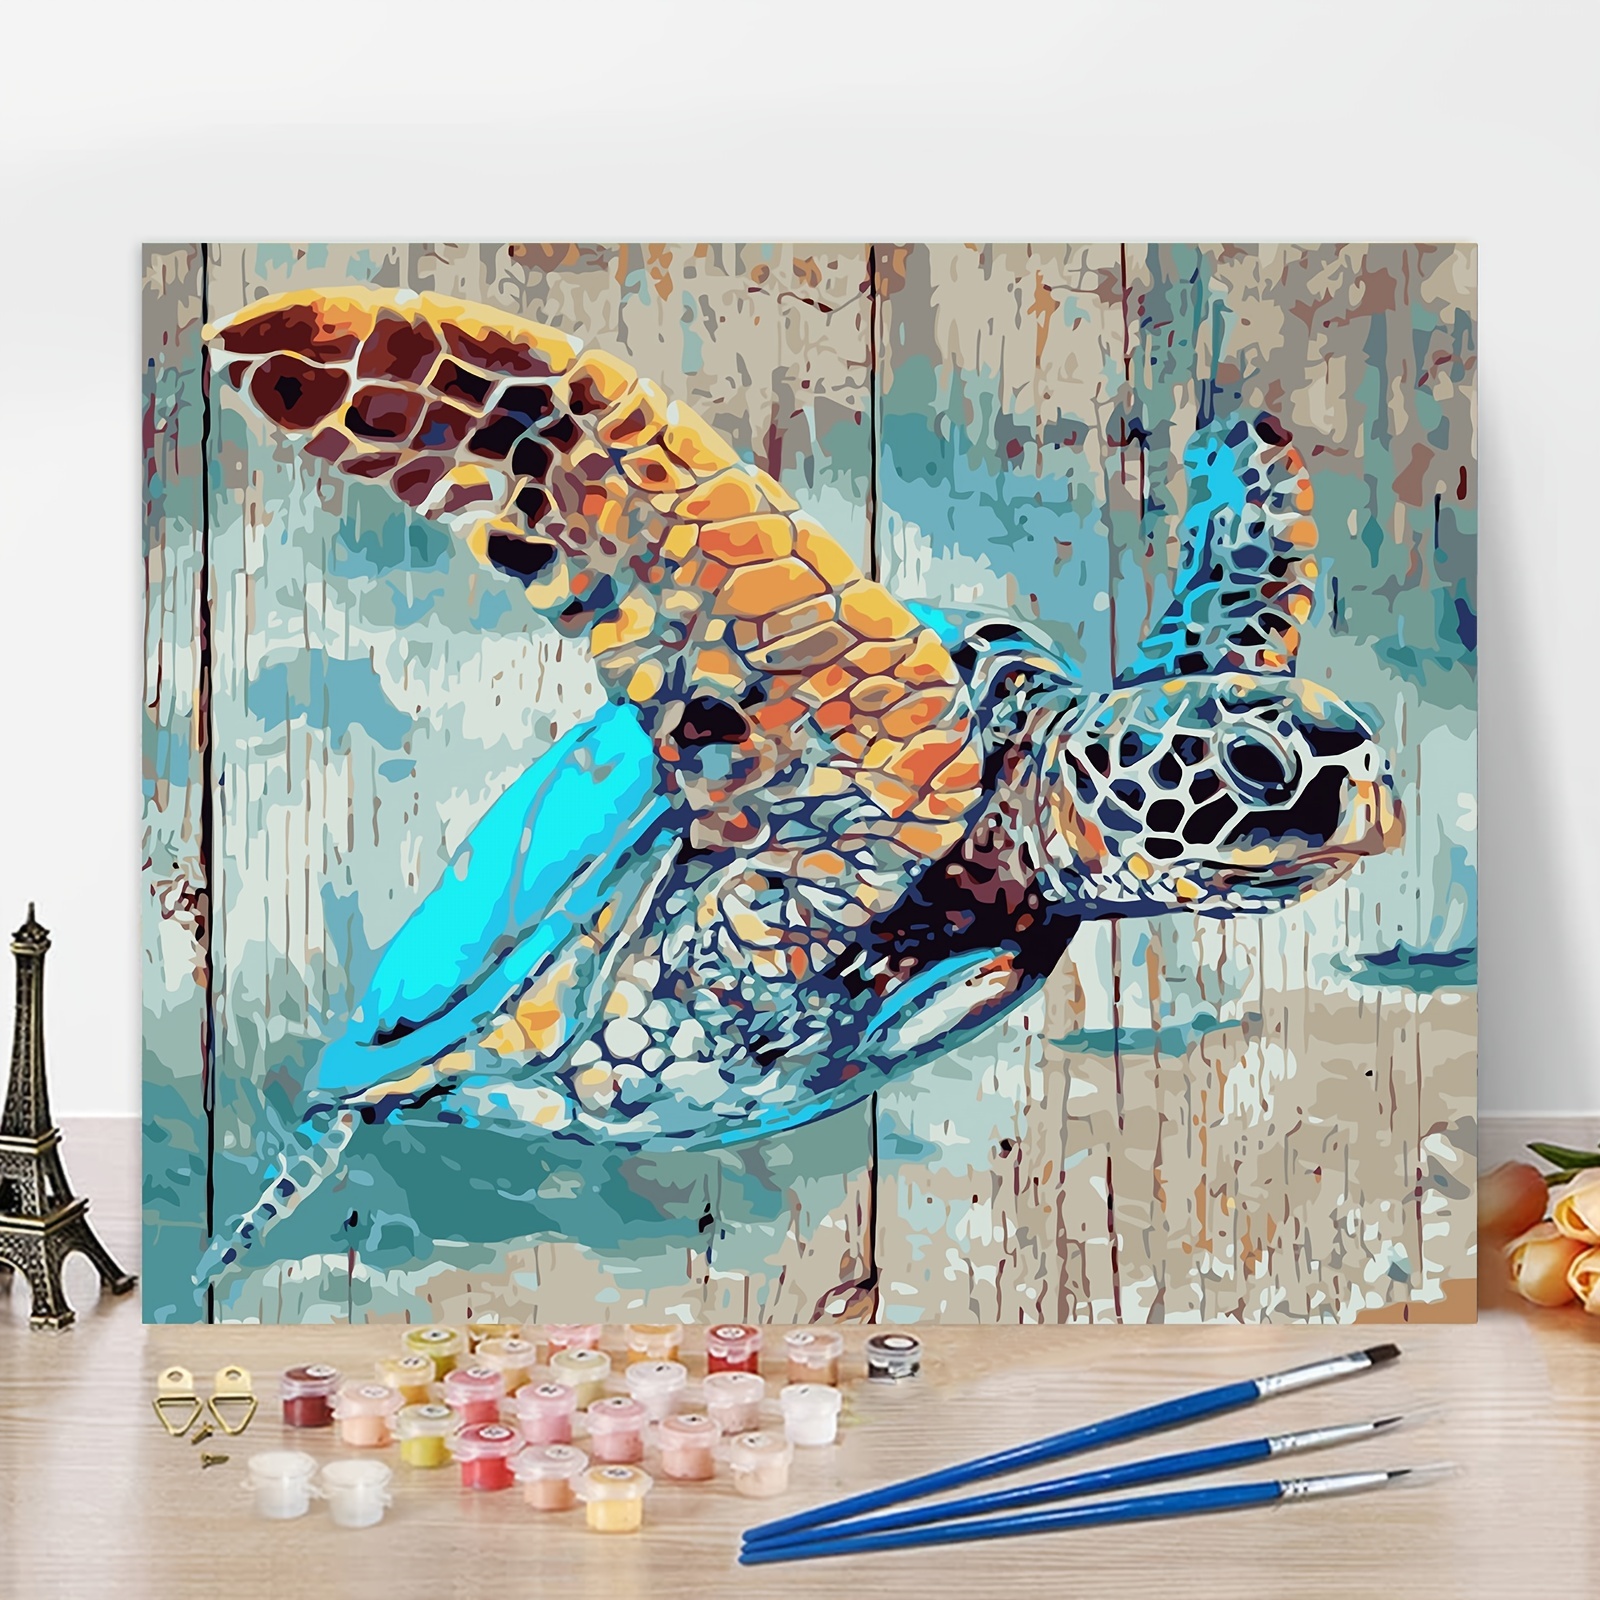 Bview Art Professional Quality 3Pcs 100% Cotton 20x30cm Stretched Canvas  for Oil Acrylic & Pouring